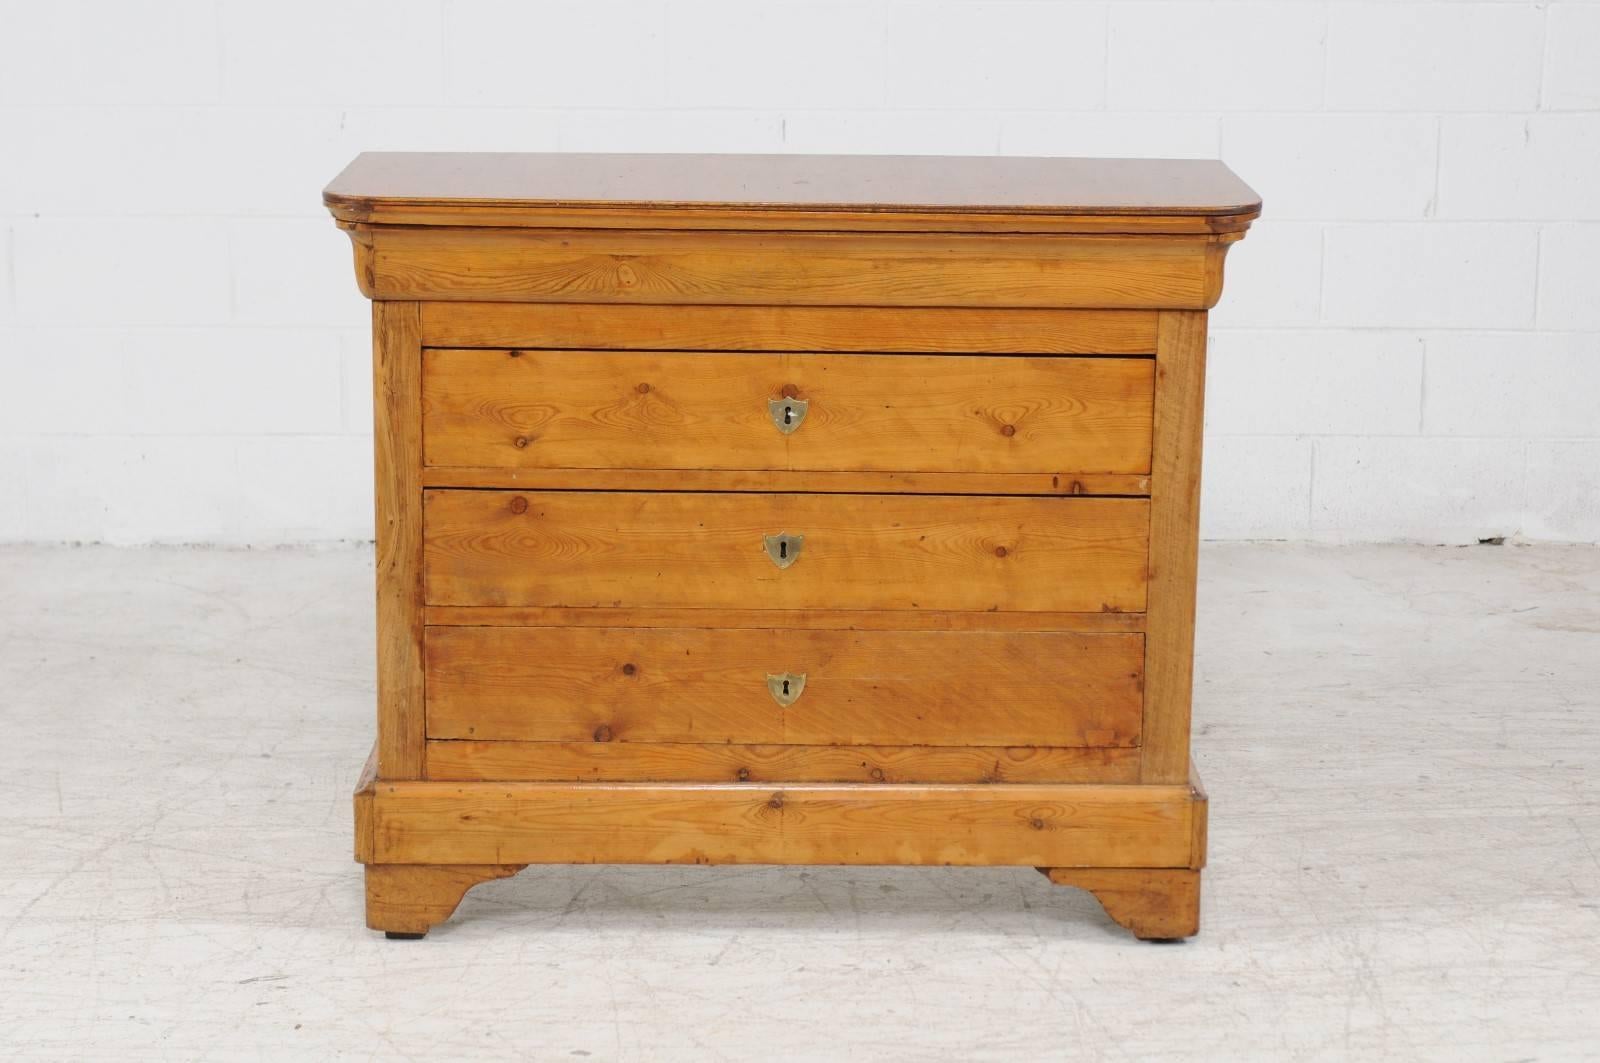 A French Louis-Philippe style pine four-drawer commode from the late 19th century. This French commode features a rectangular top with rounded corners in the front sitting above a frieze pull-out drawer concealed in the upper rail. Three larger